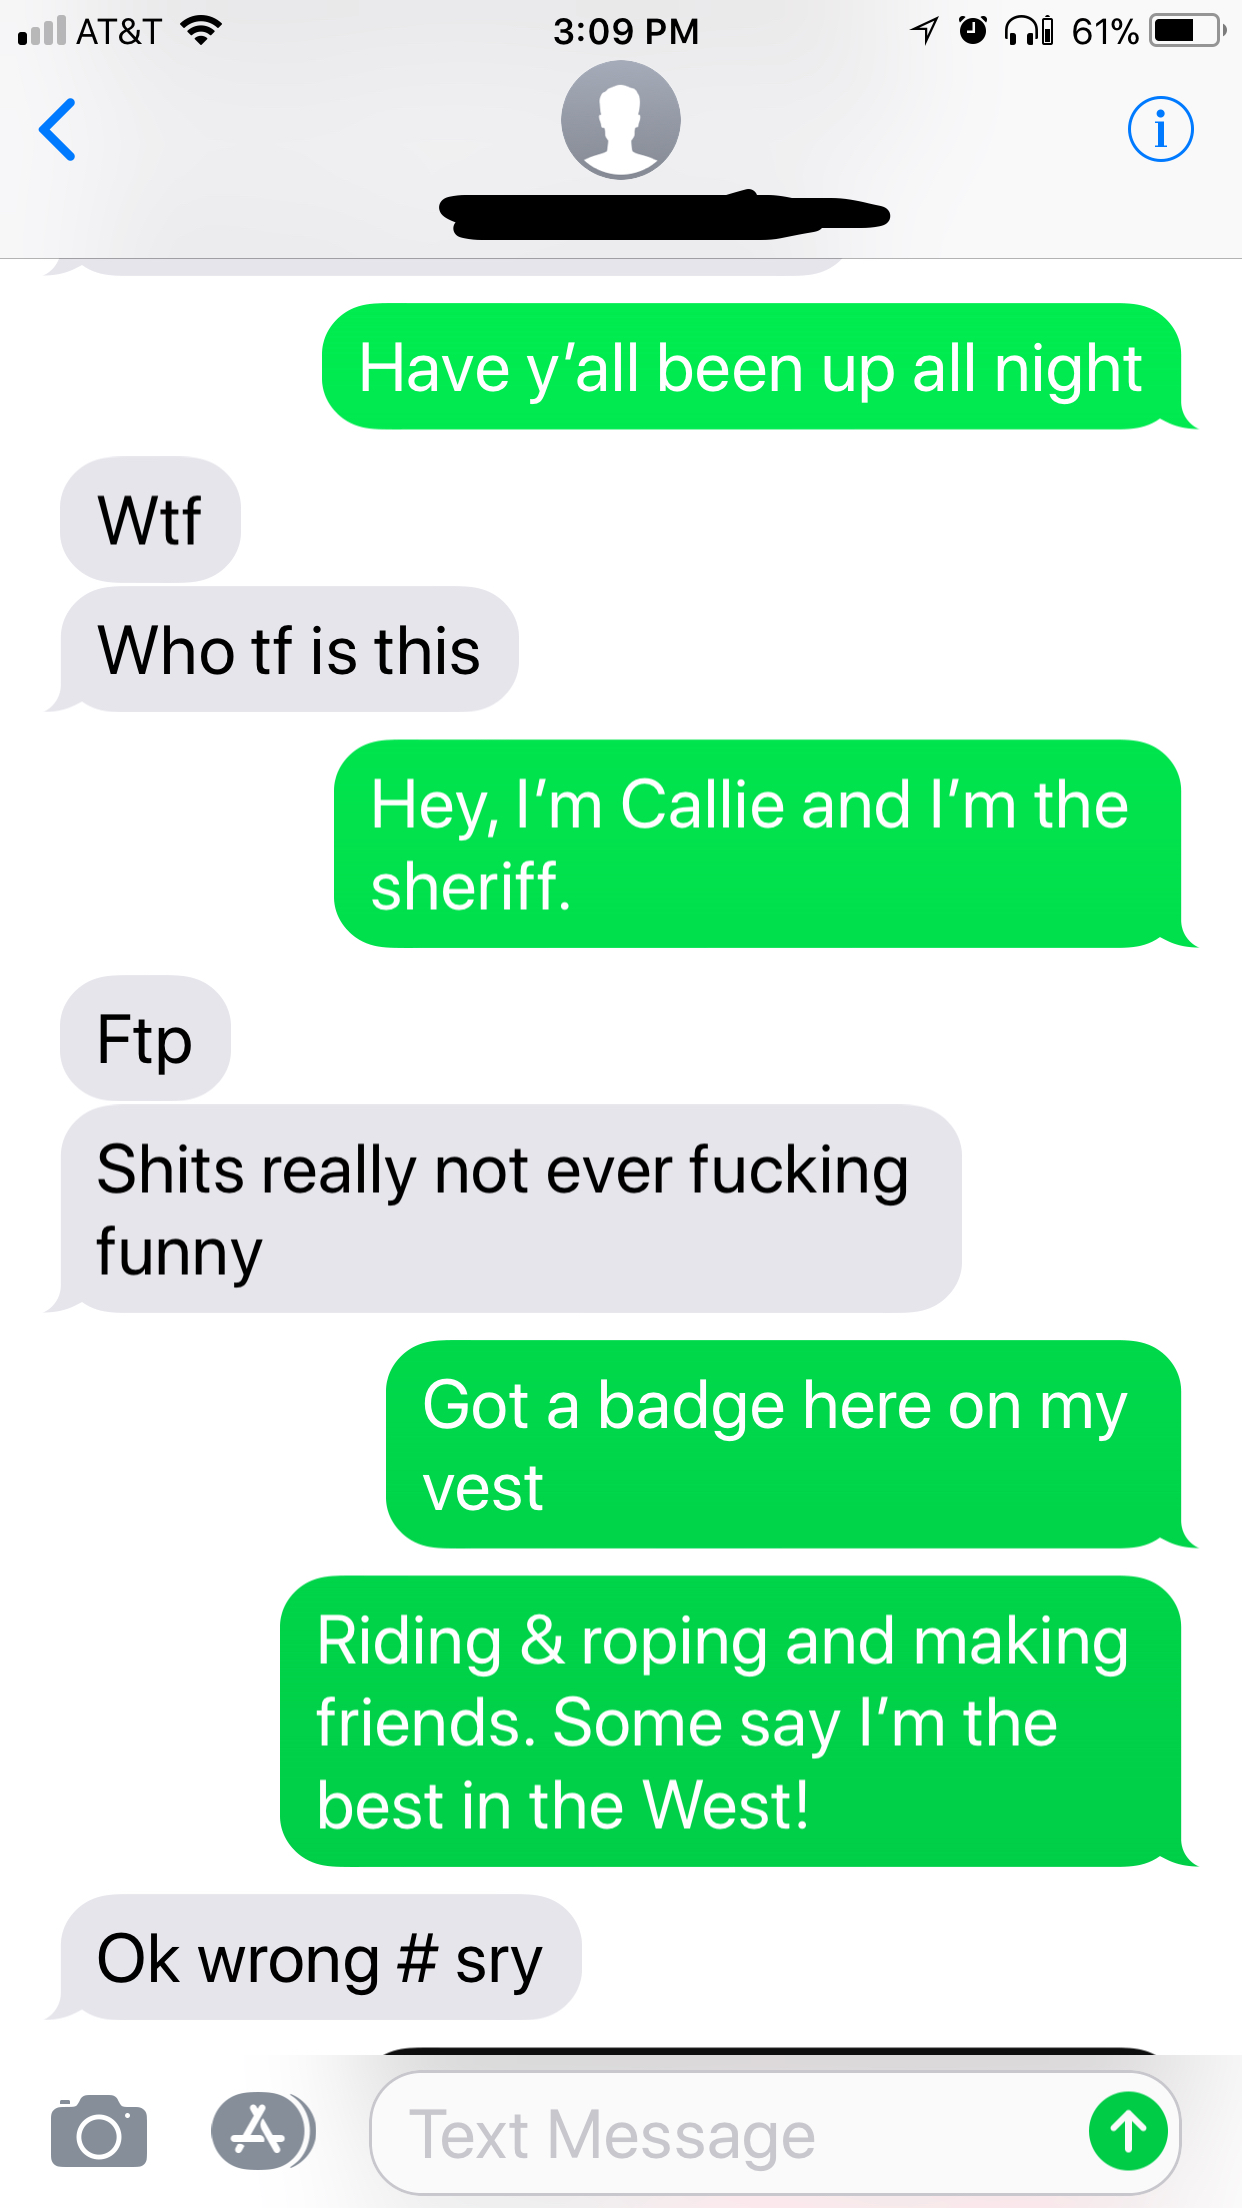 number - At&T To G4 61% Have y'all been up all night Wtf Who tf is this Hey, I'm Callie and I'm the sheriff. Ftp Shits really not ever fucking funny Got a badge here on my vest Riding & roping and making friends. Some say I'm the best in the West! Ok wron